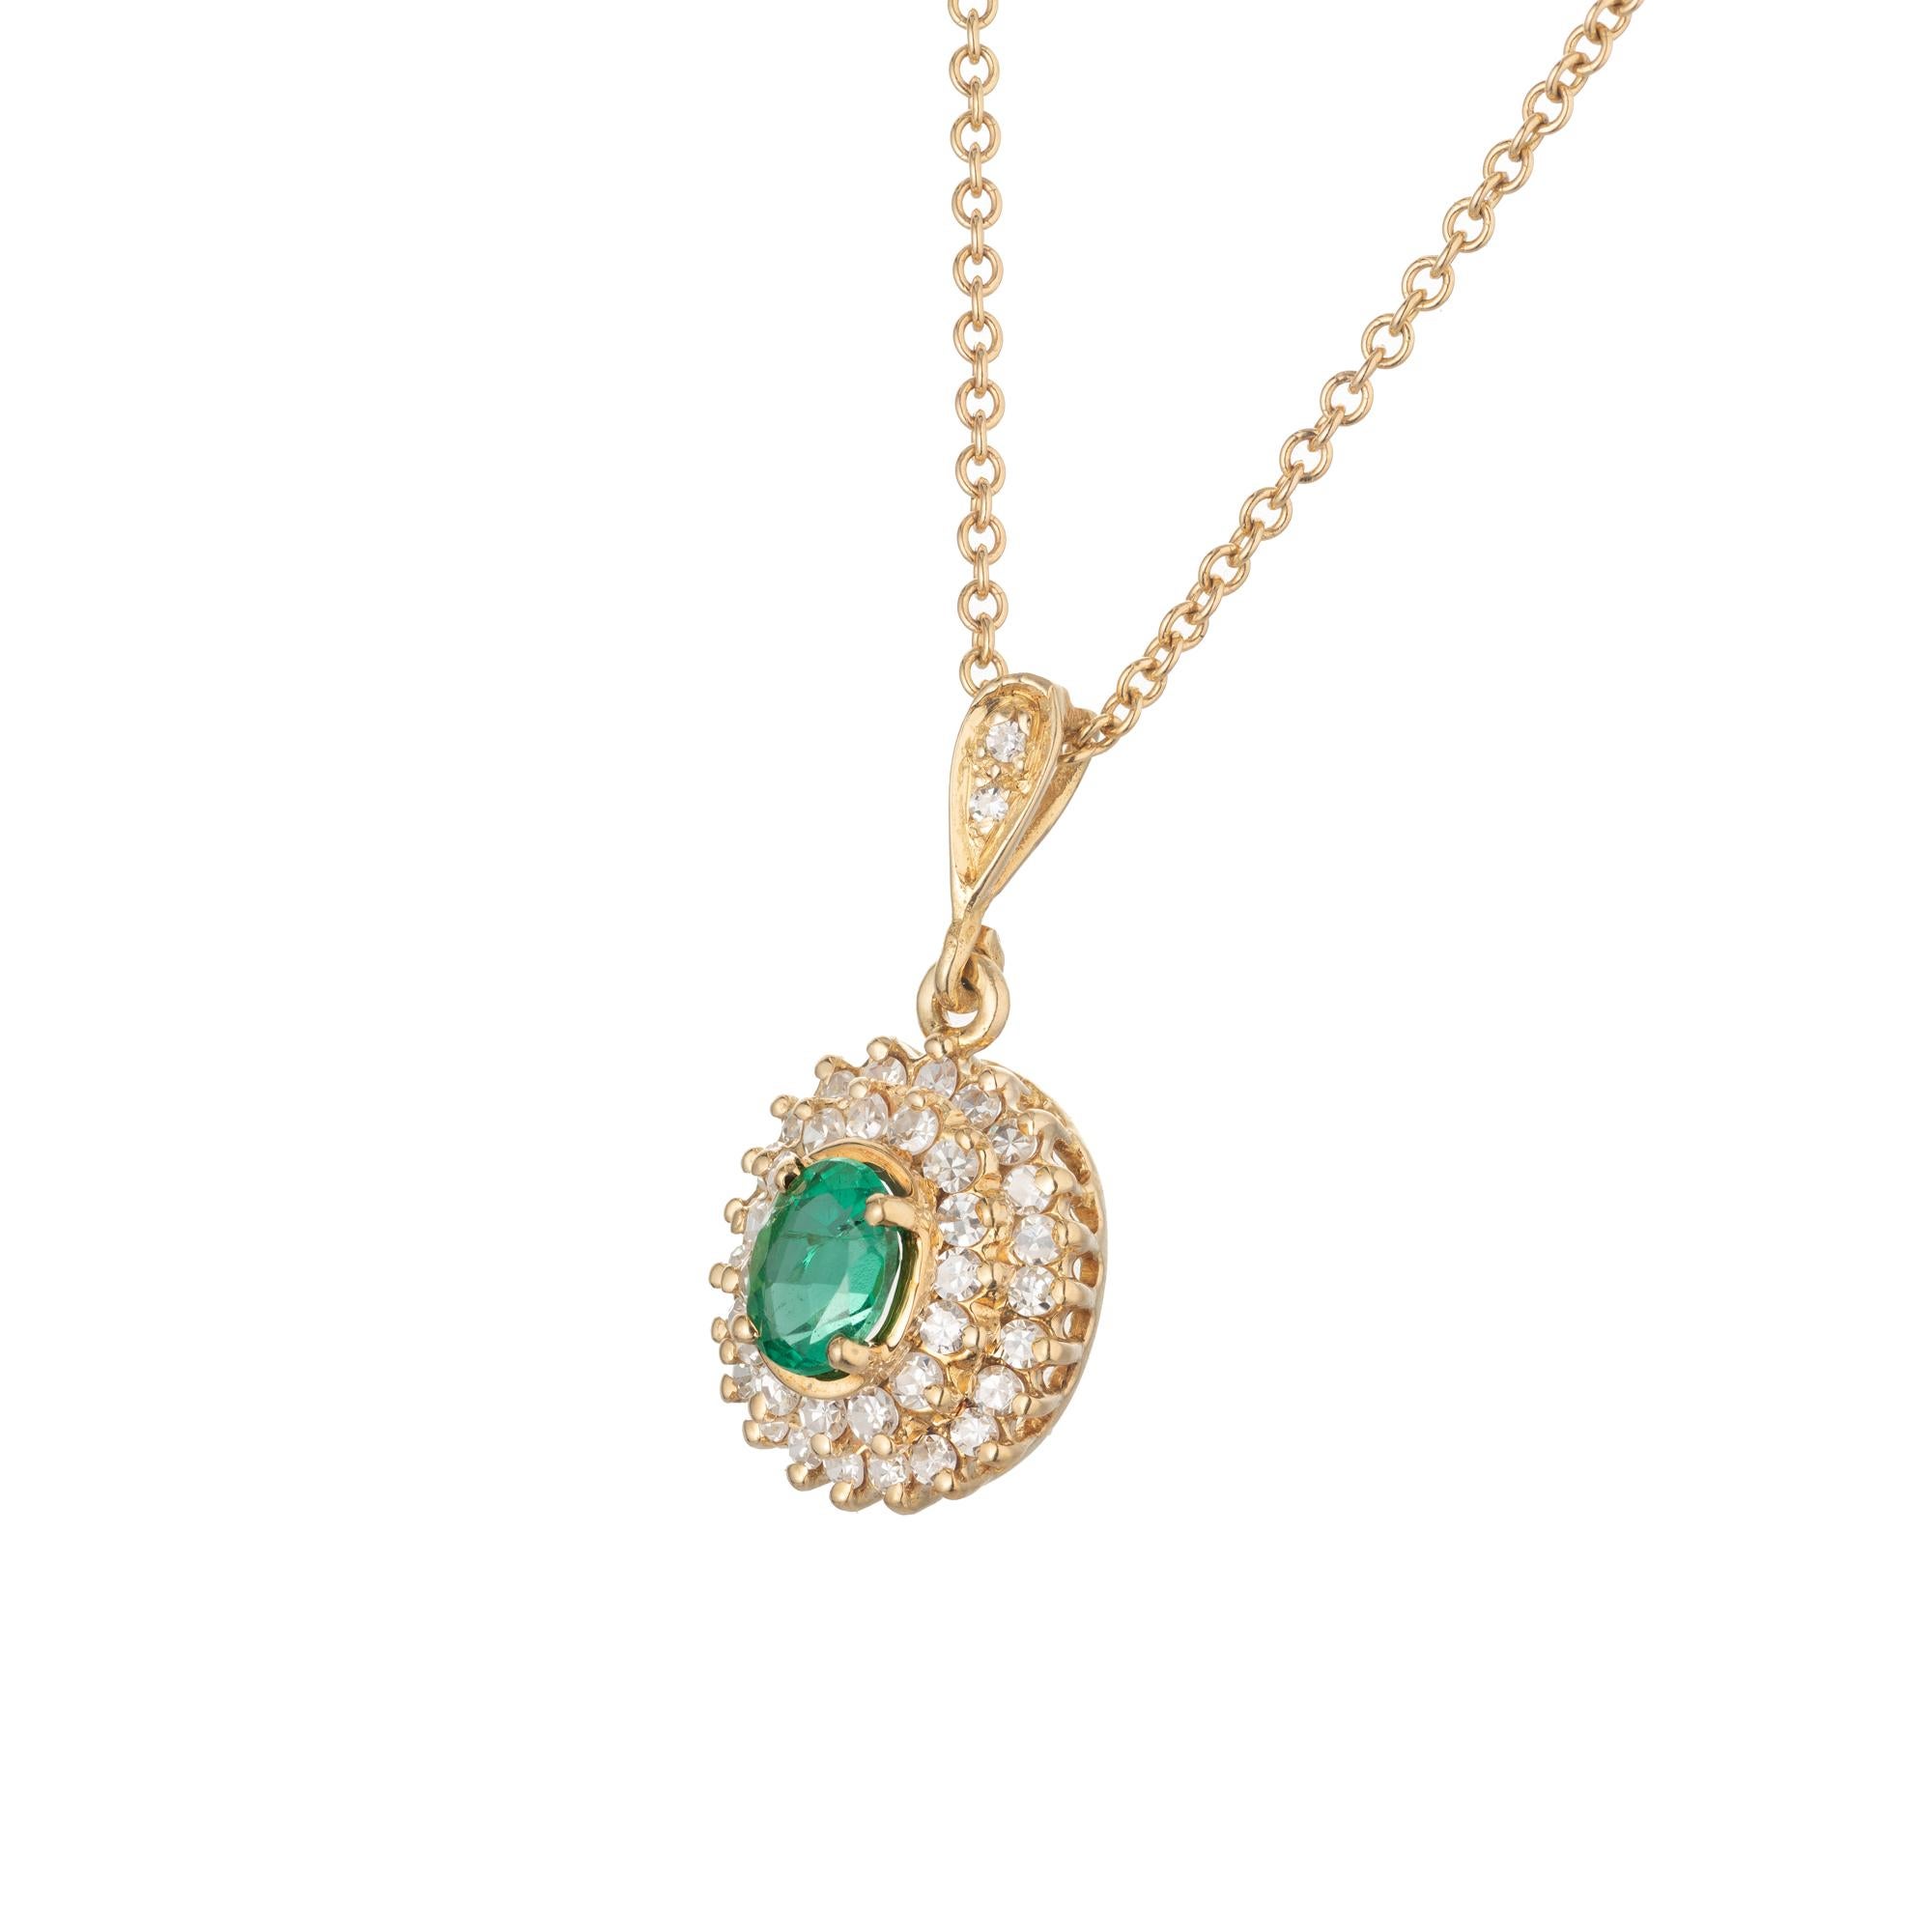 Emerald diamond pendant necklace circa 1950-1960 with a bright green GIA certified natural center emerald with a two row halo of round diamonds in a tiered design. 18k yellow gold chain. 18 inches. 

1 oval green MI emerald, Approximate .35ct GIA